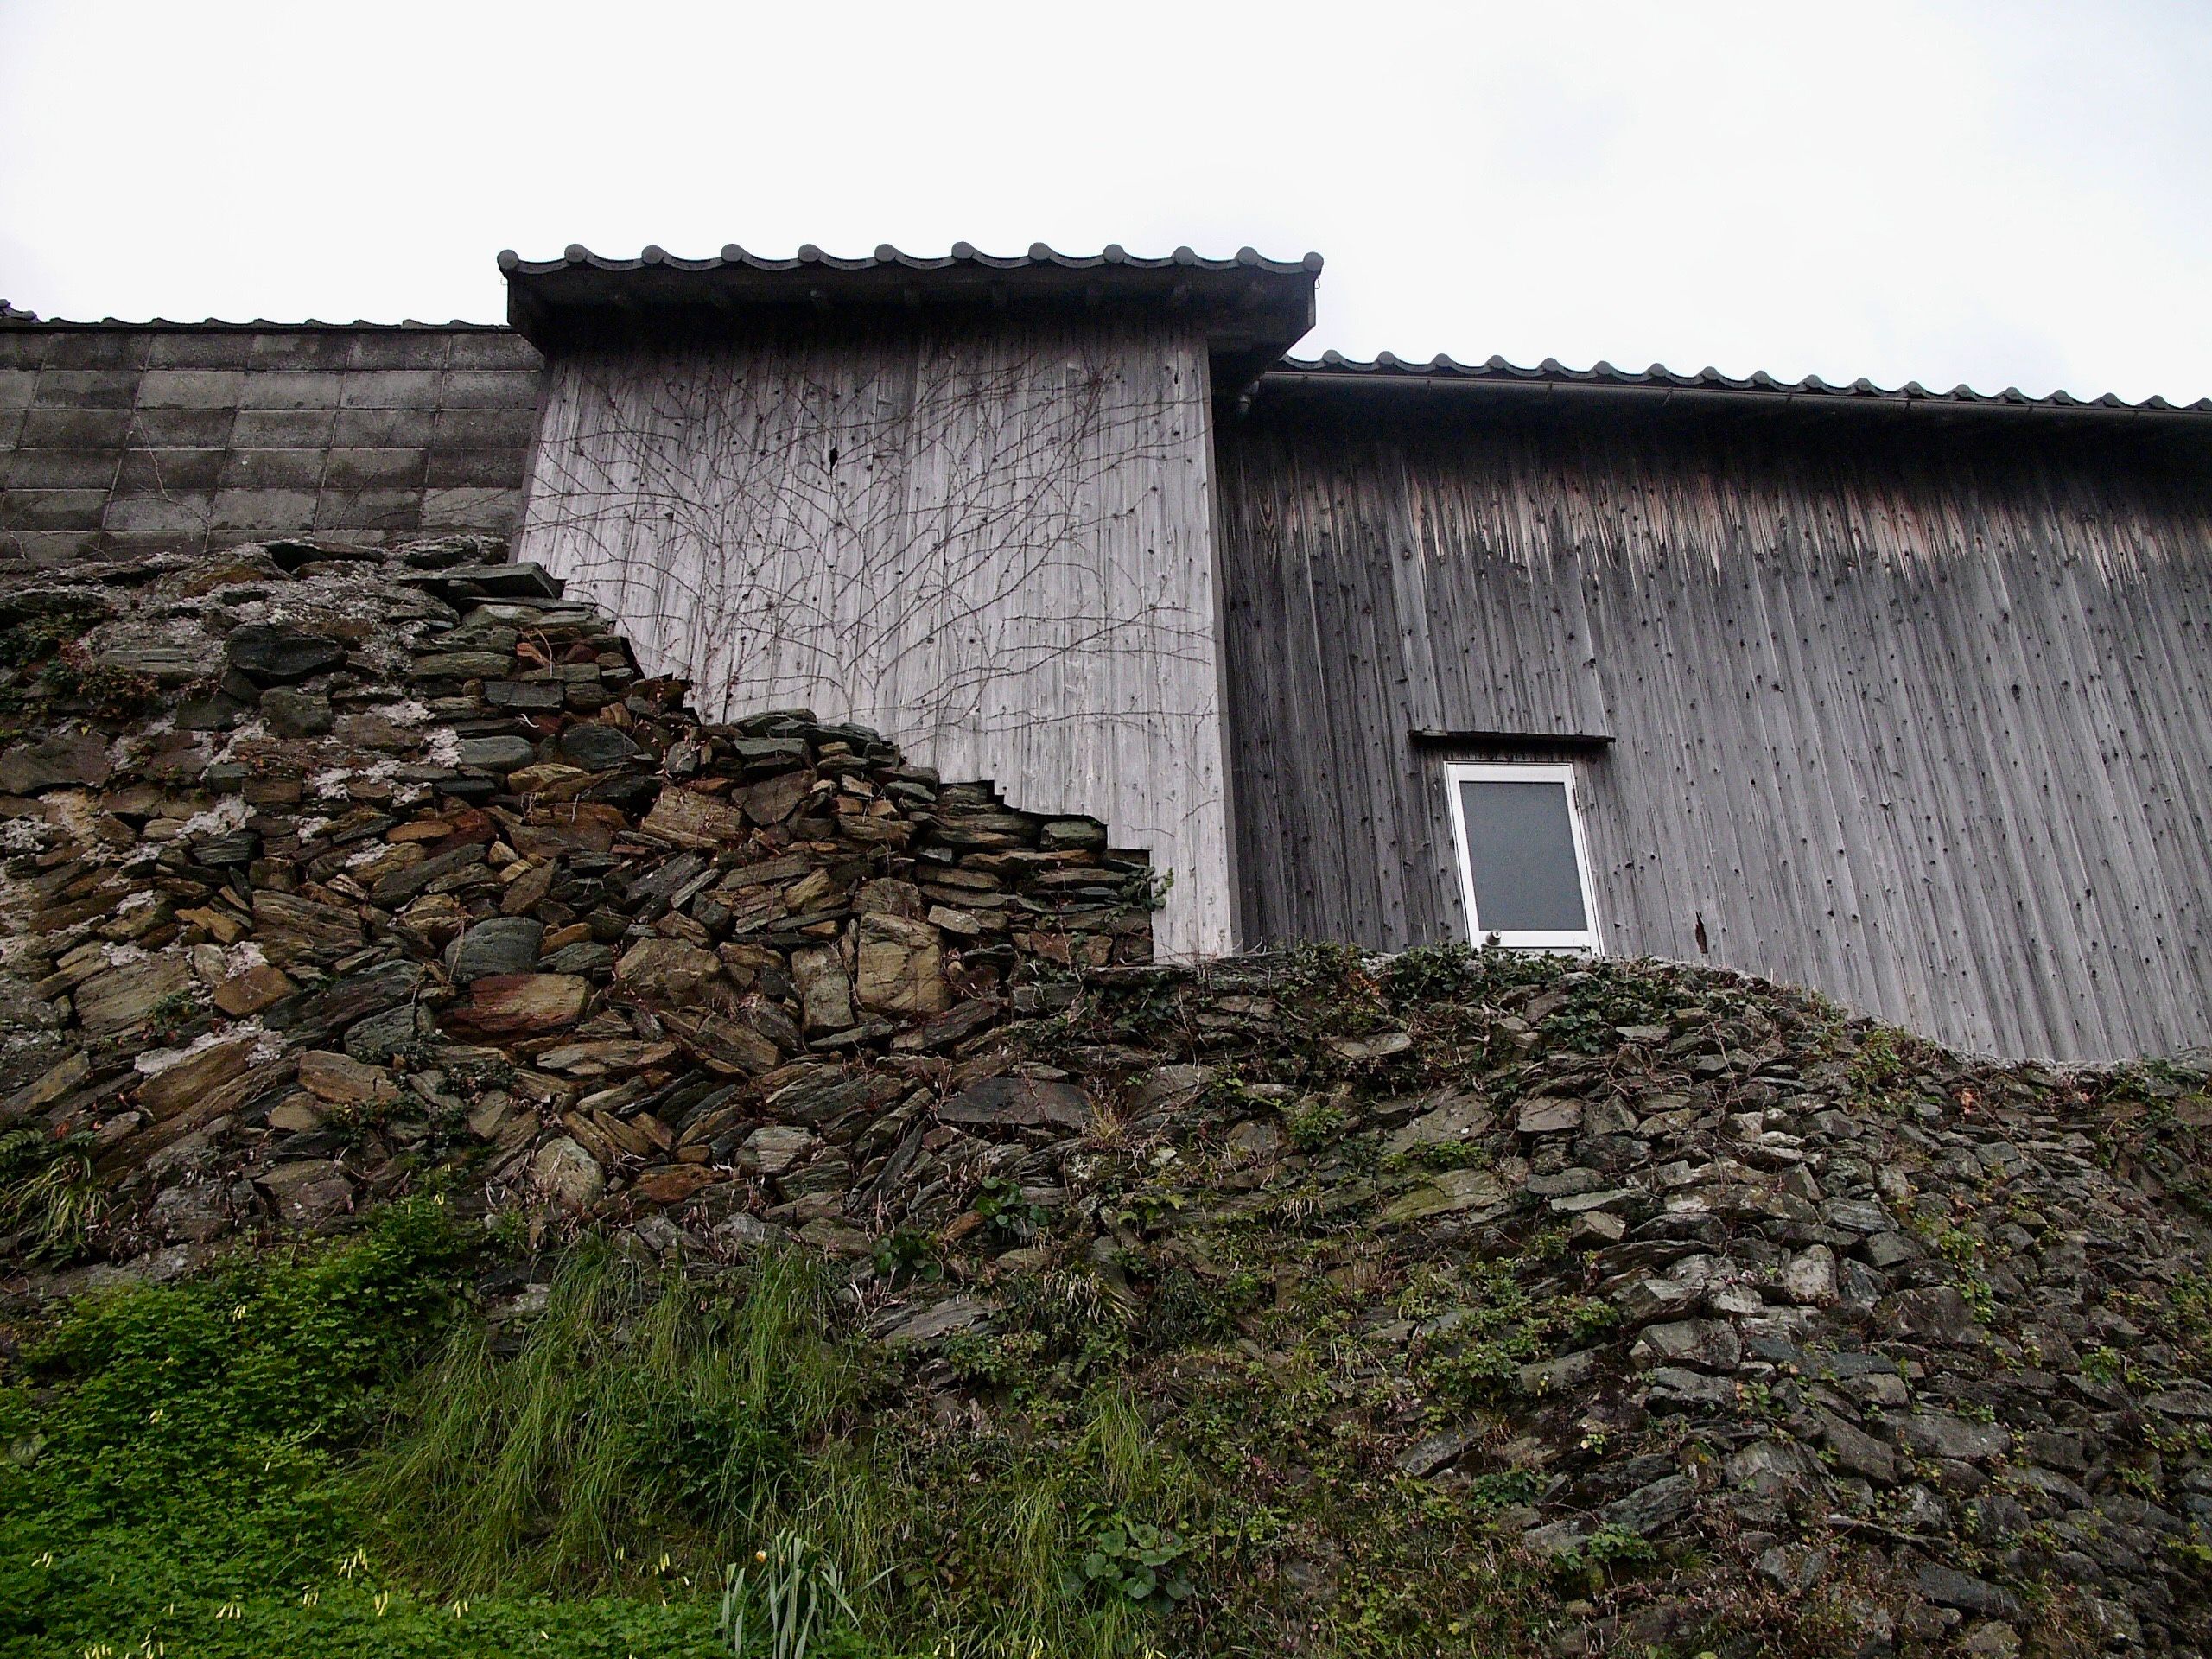 Looking up on a wooden house built atop a stone wall.